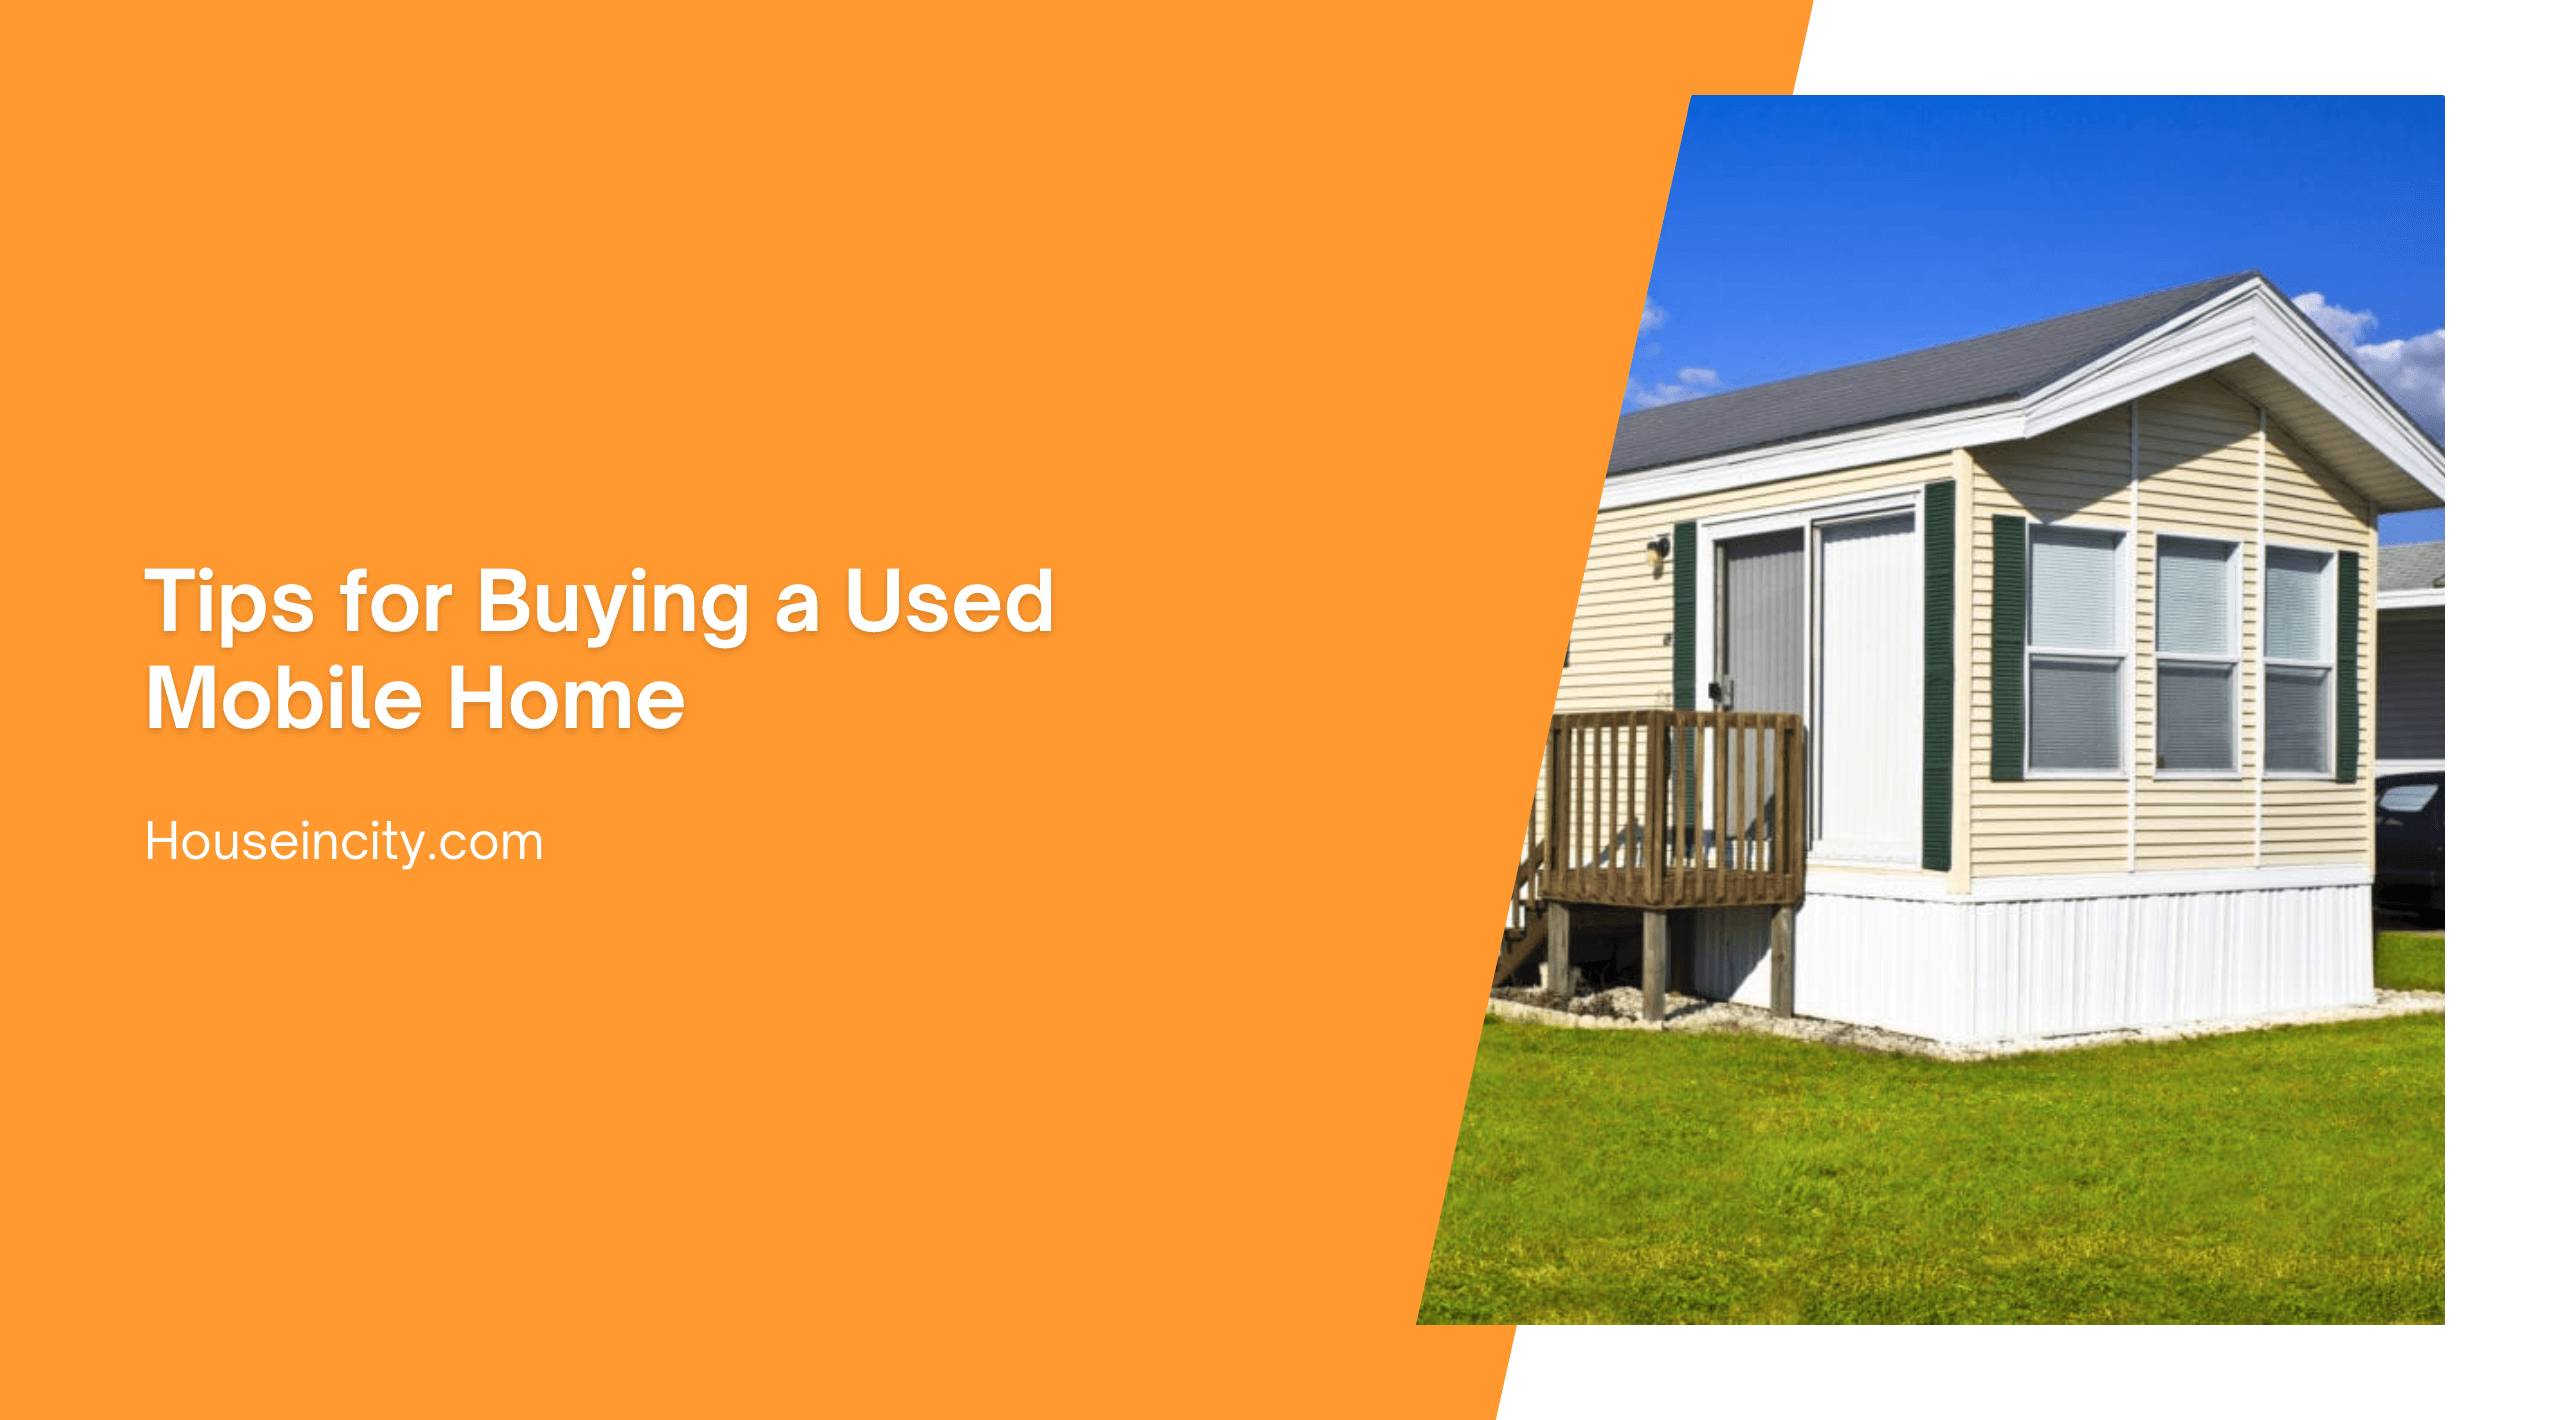 Tips for Buying a Used Mobile Home